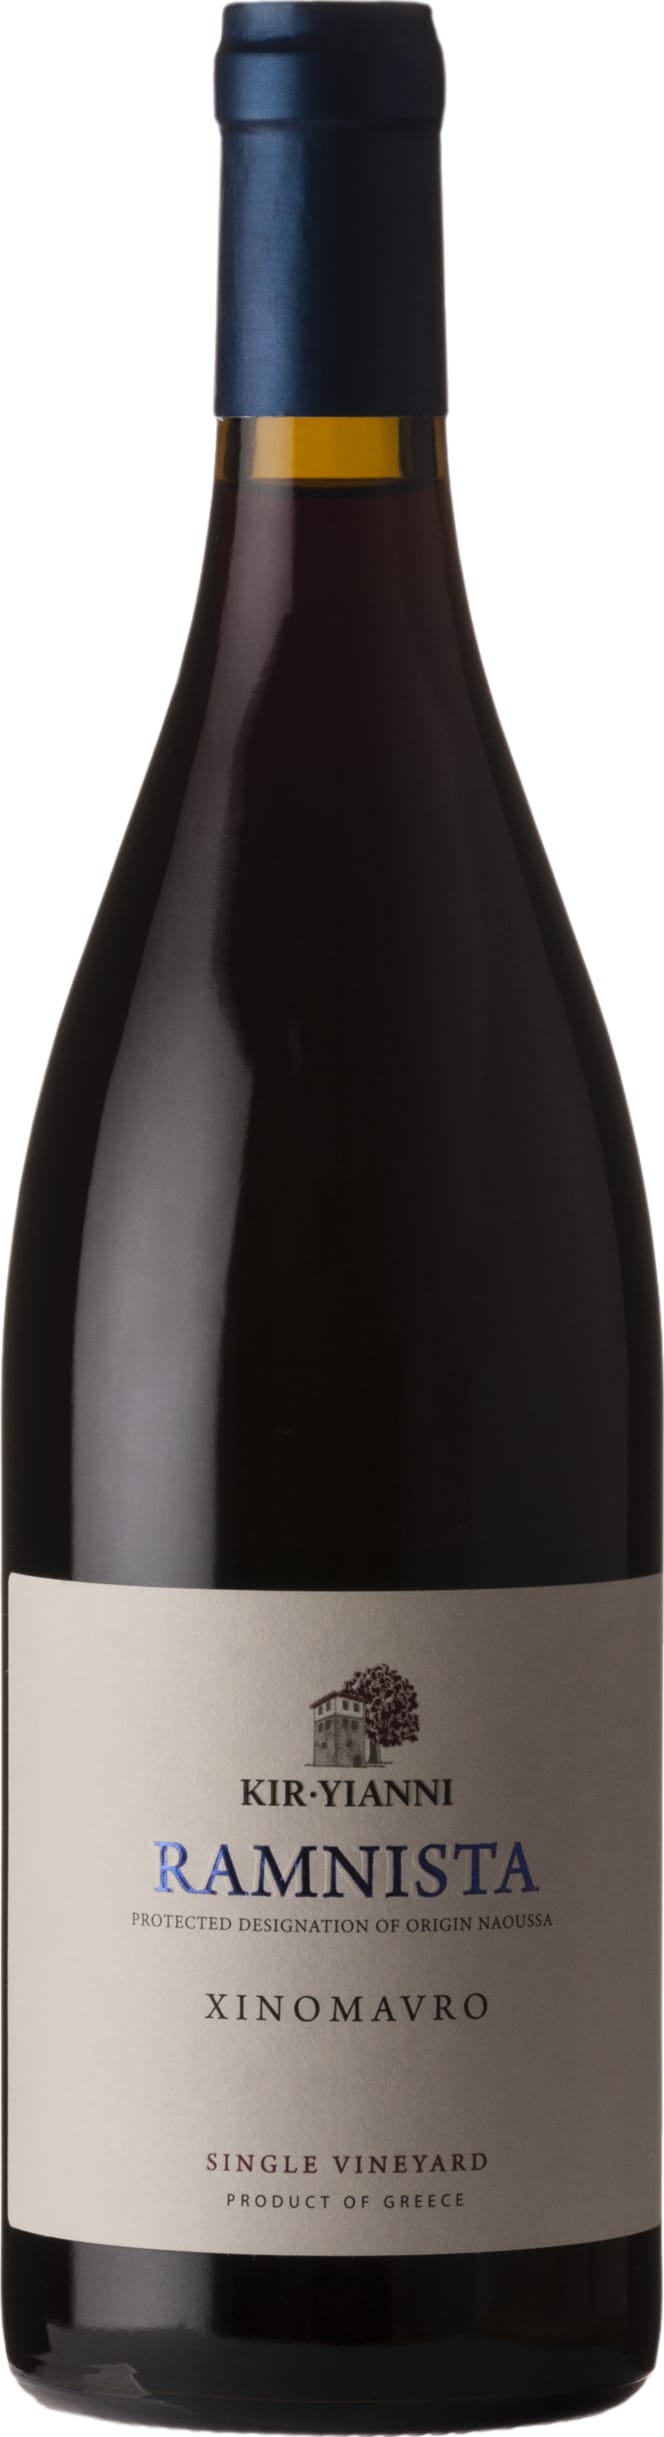 Kir-Yianni Ramnista Xinomavro PDO Naoussa 2019 75cl - Buy Kir-Yianni Wines from GREAT WINES DIRECT wine shop